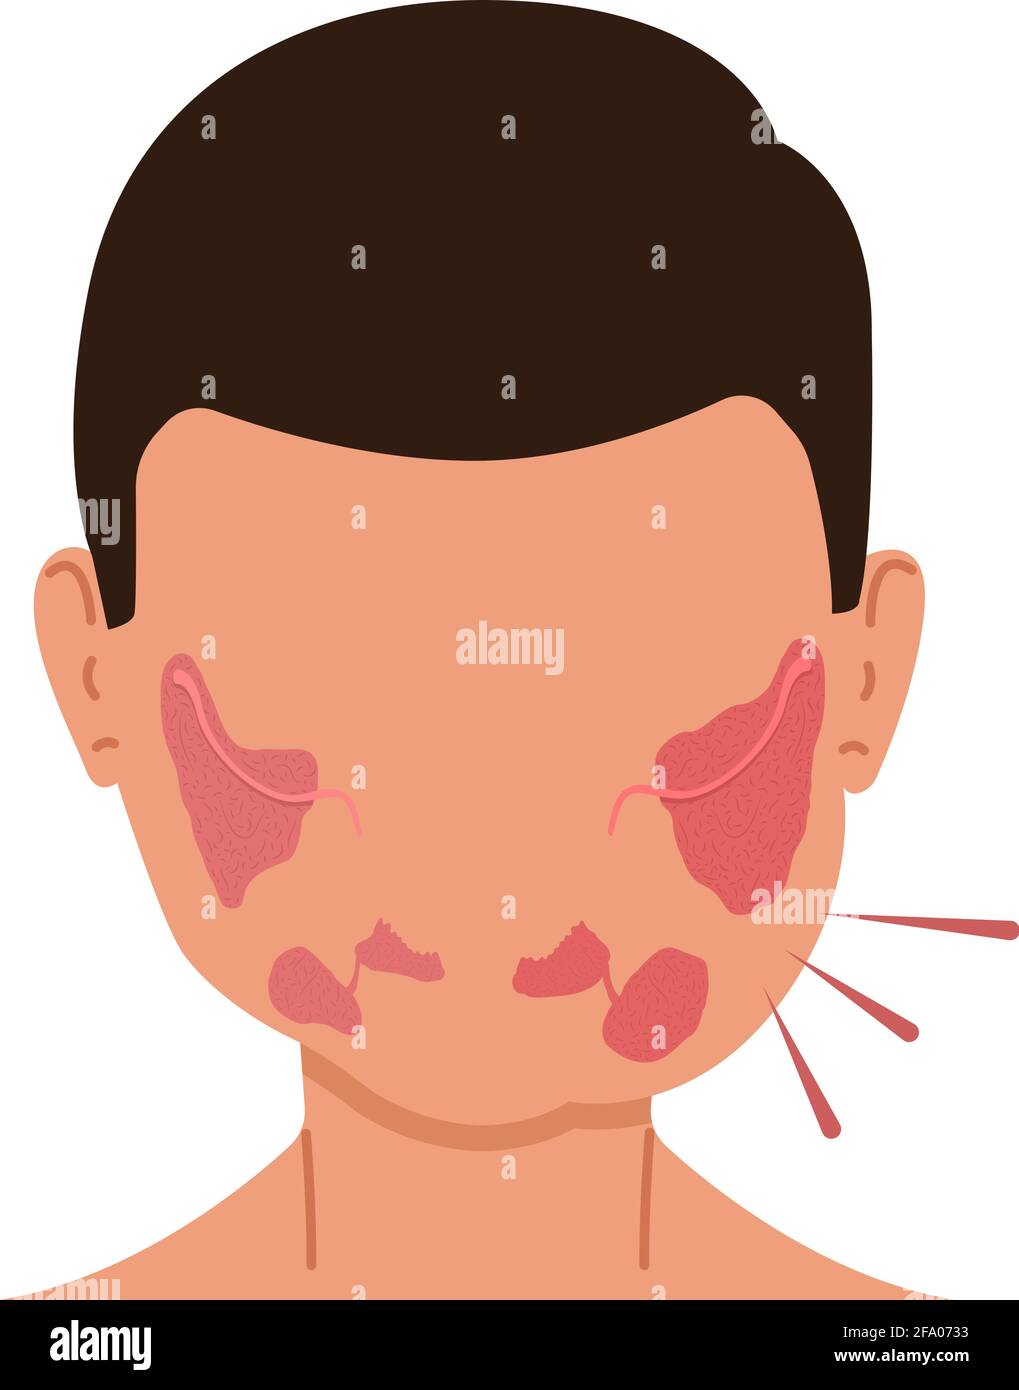 A person with inflamed salivary glands. Medical vector illustration. Stock Vector